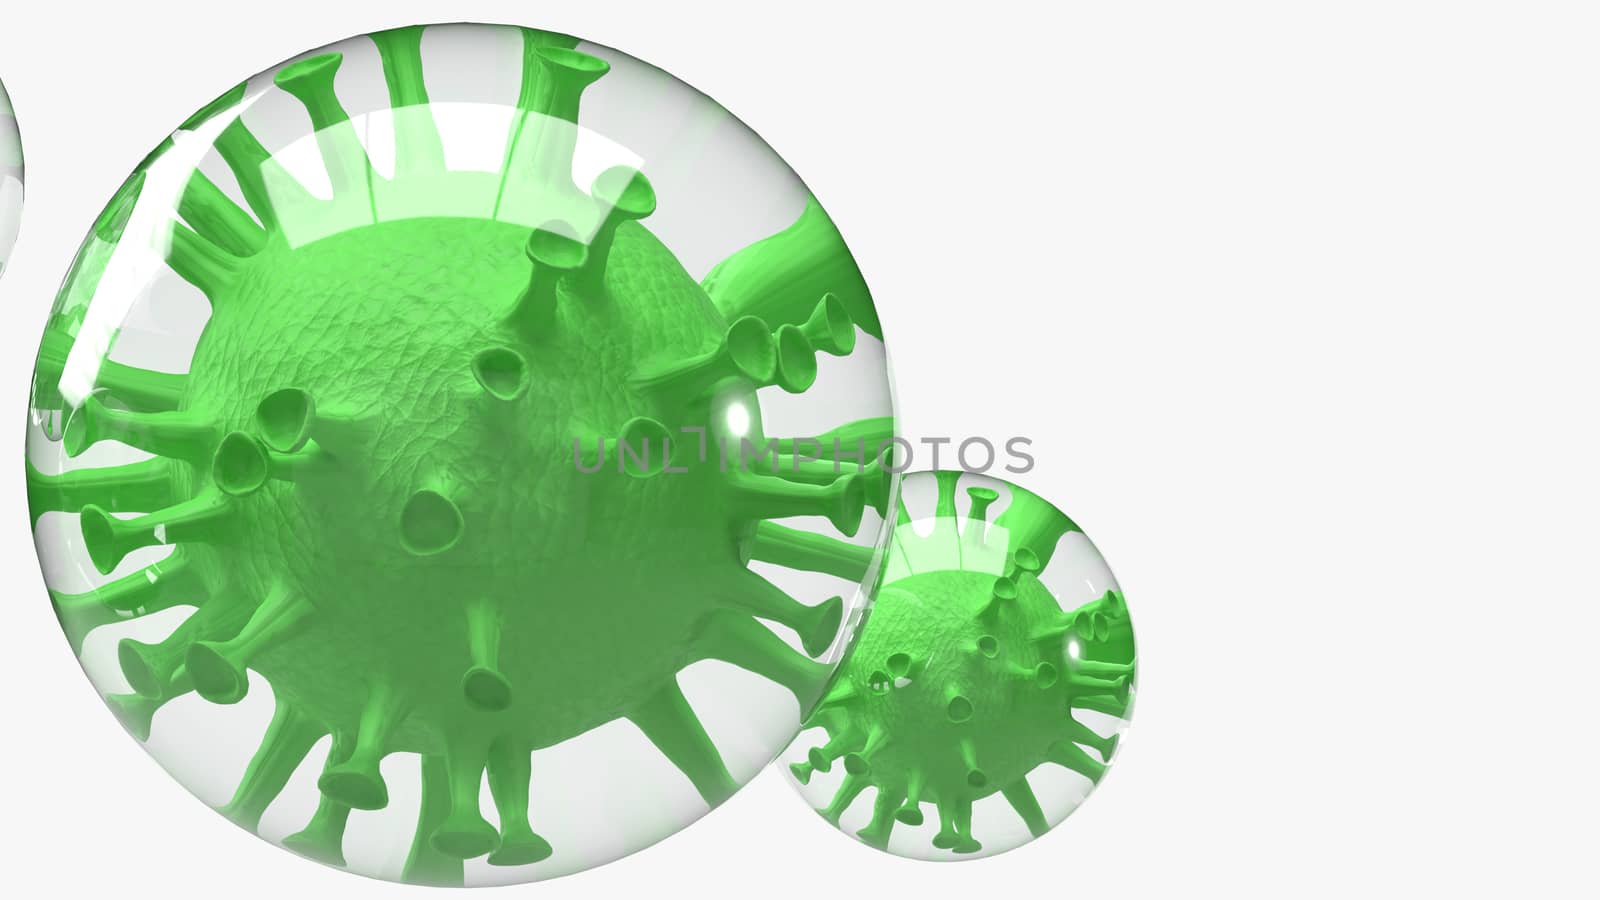 The virus in bubble for outbreak content 3d rendering.